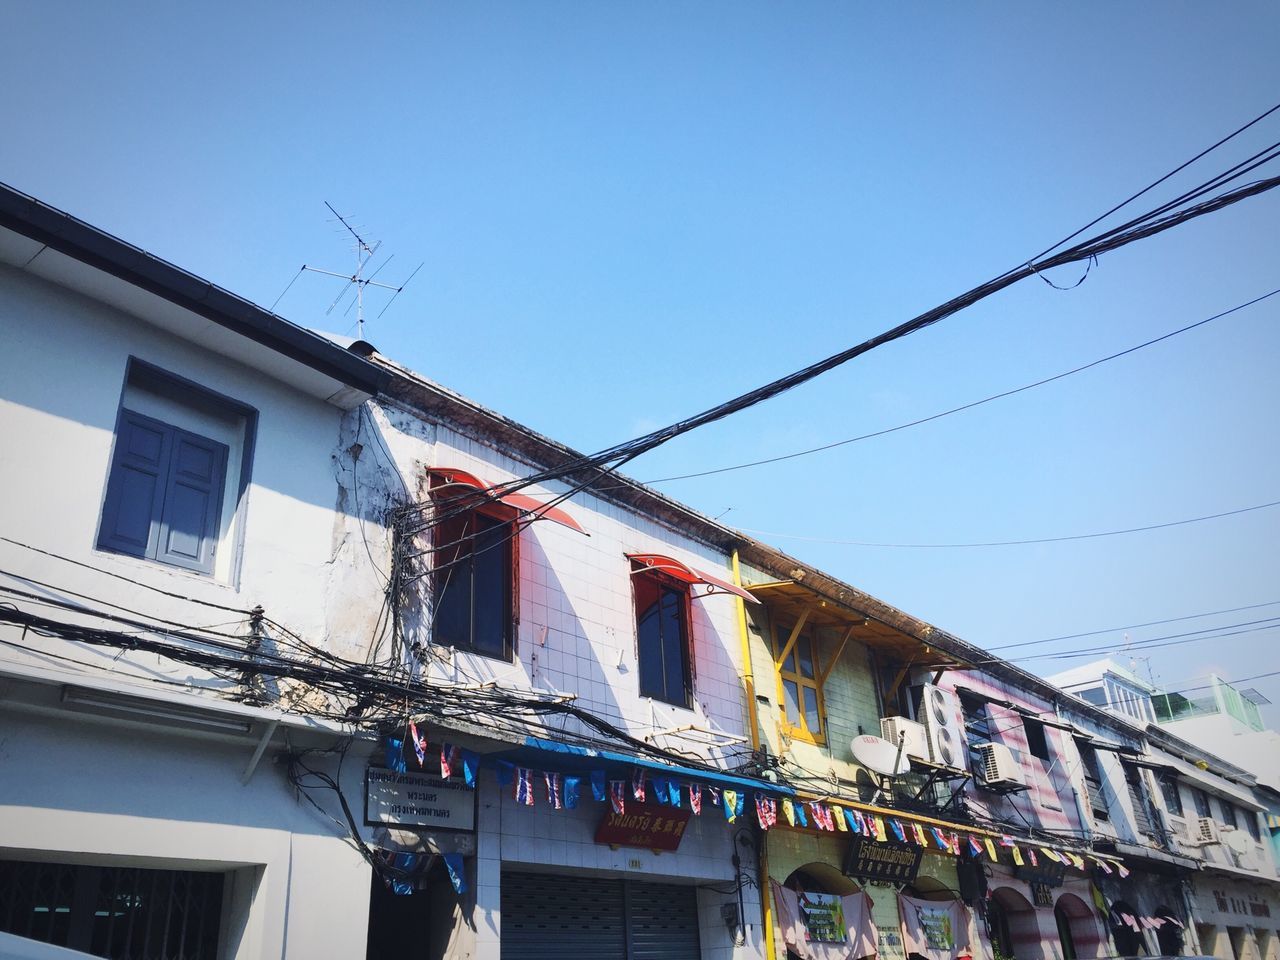 building exterior, architecture, built structure, low angle view, clear sky, residential building, residential structure, cable, building, blue, house, power line, window, city, day, outdoors, roof, balcony, hanging, sky